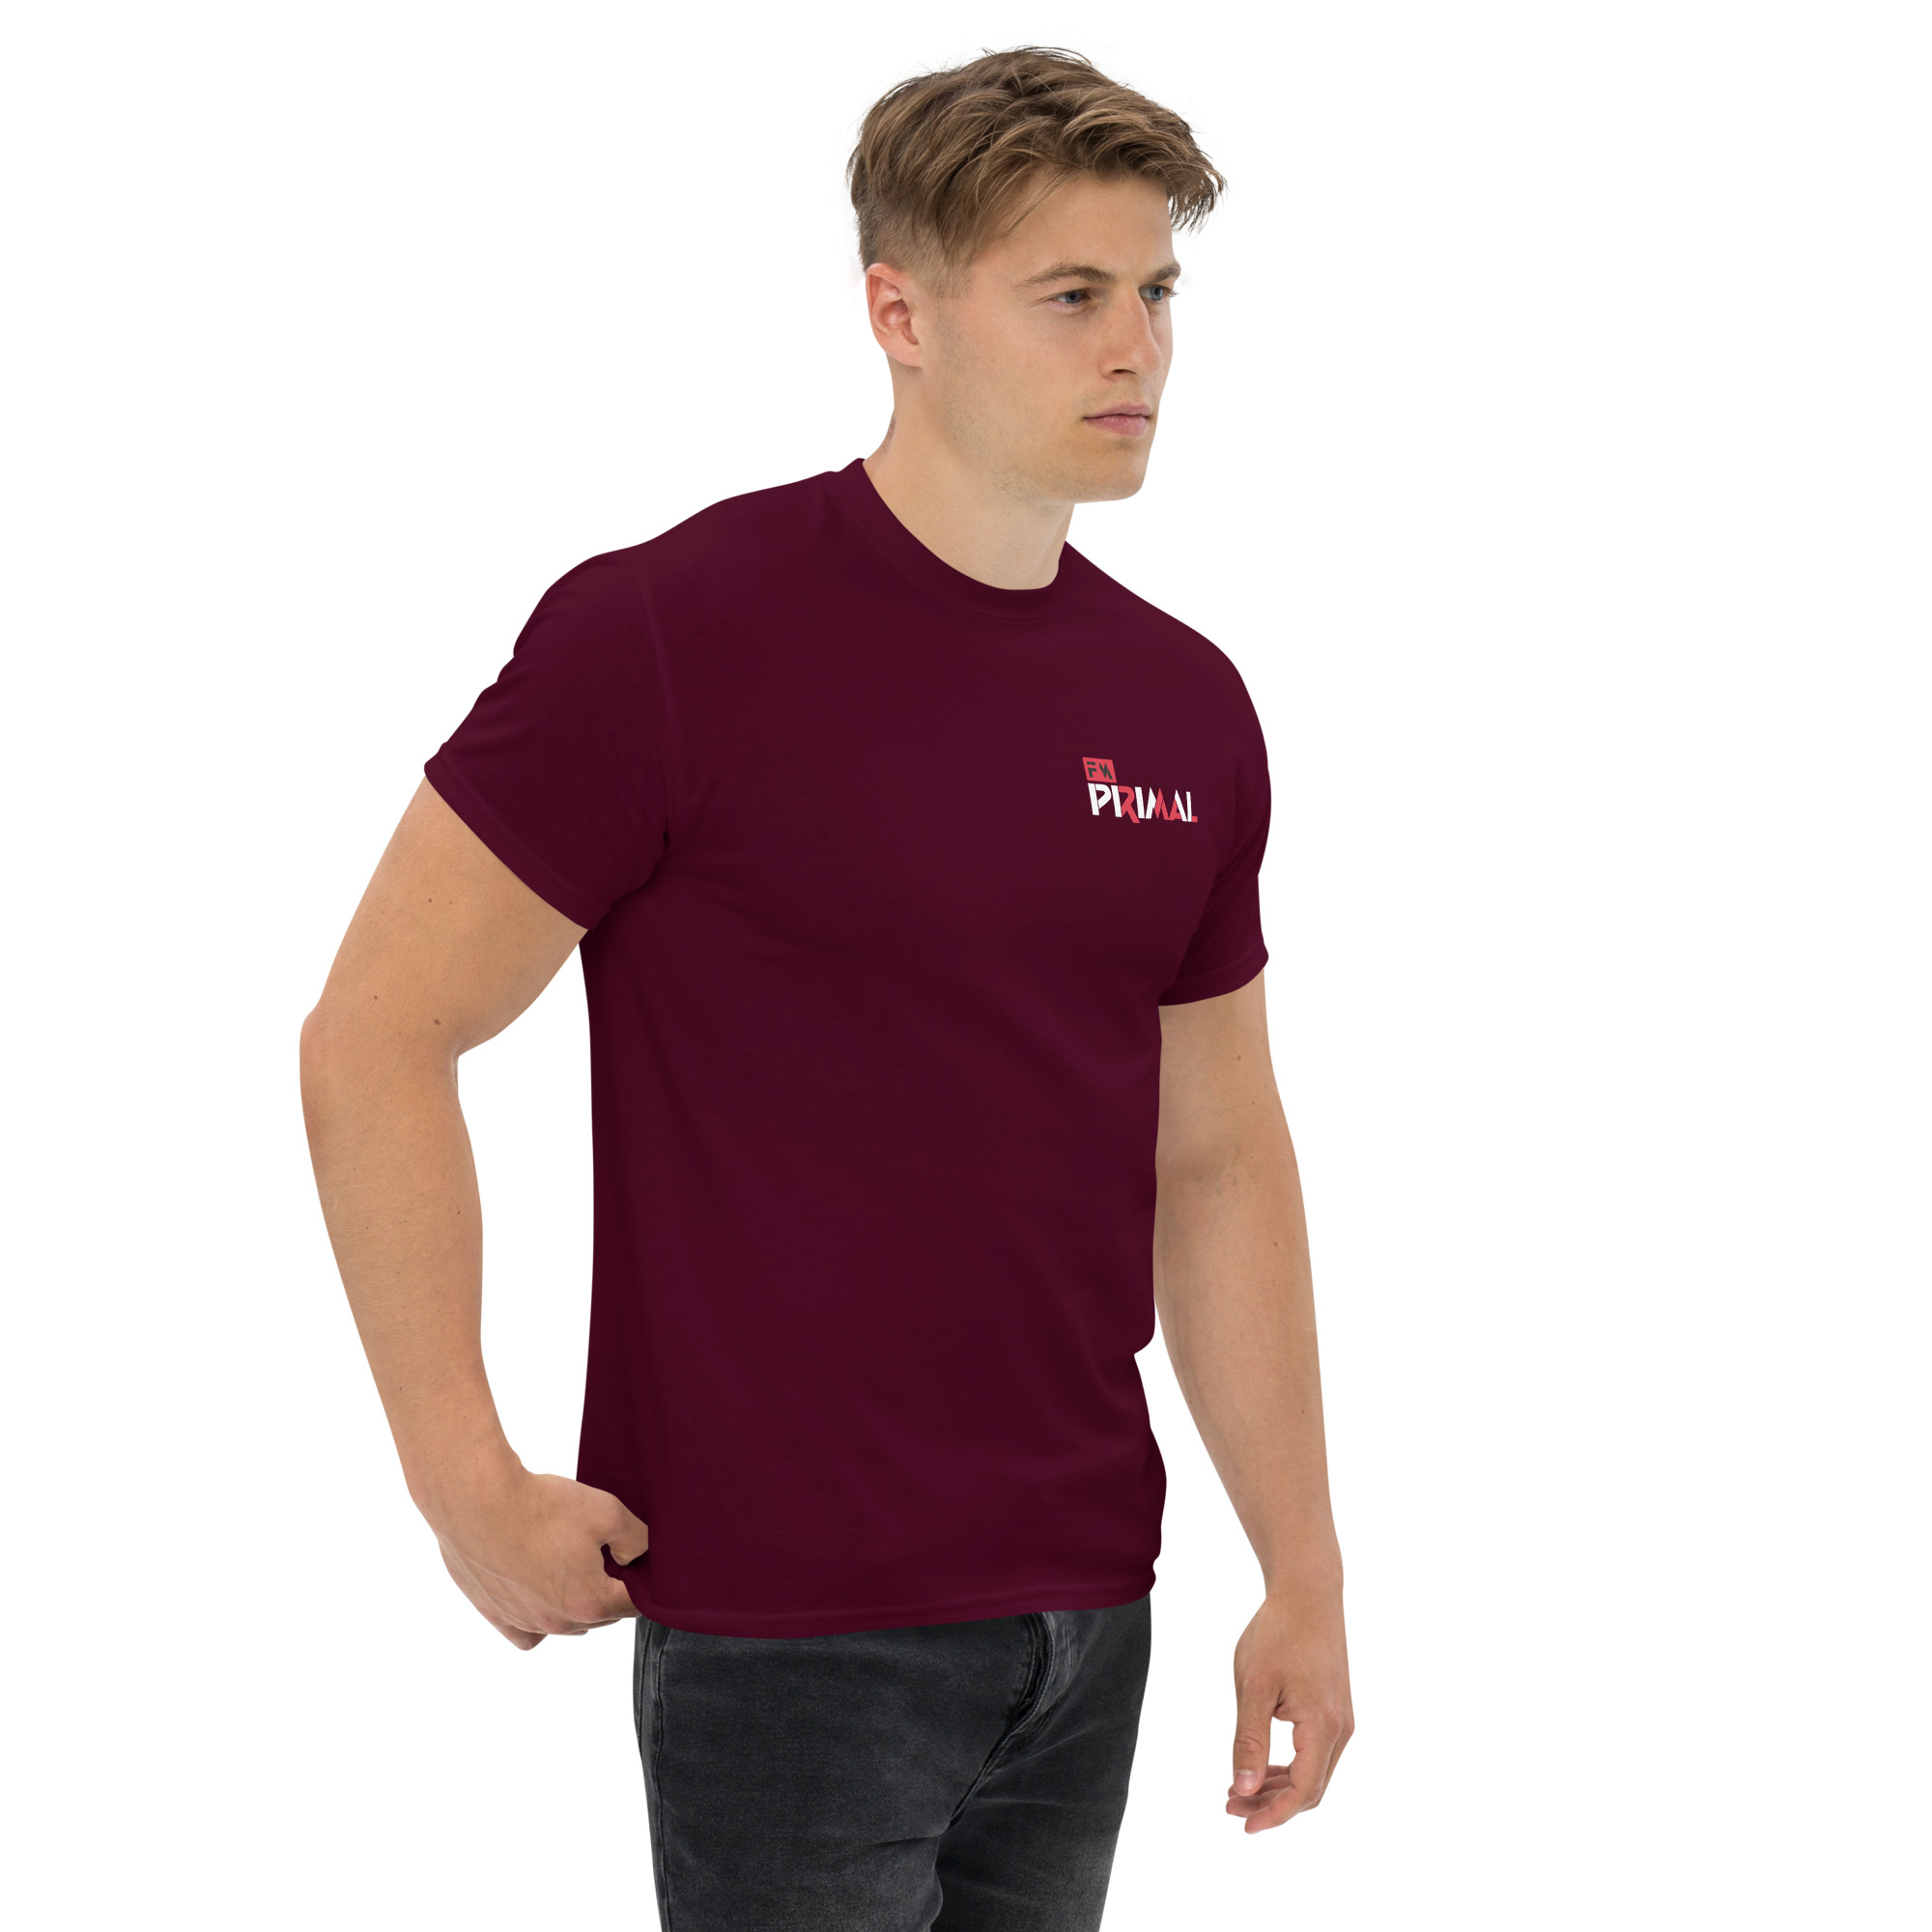 mens-classic-tee-maroon-right-front-6468249ee4250.jpg